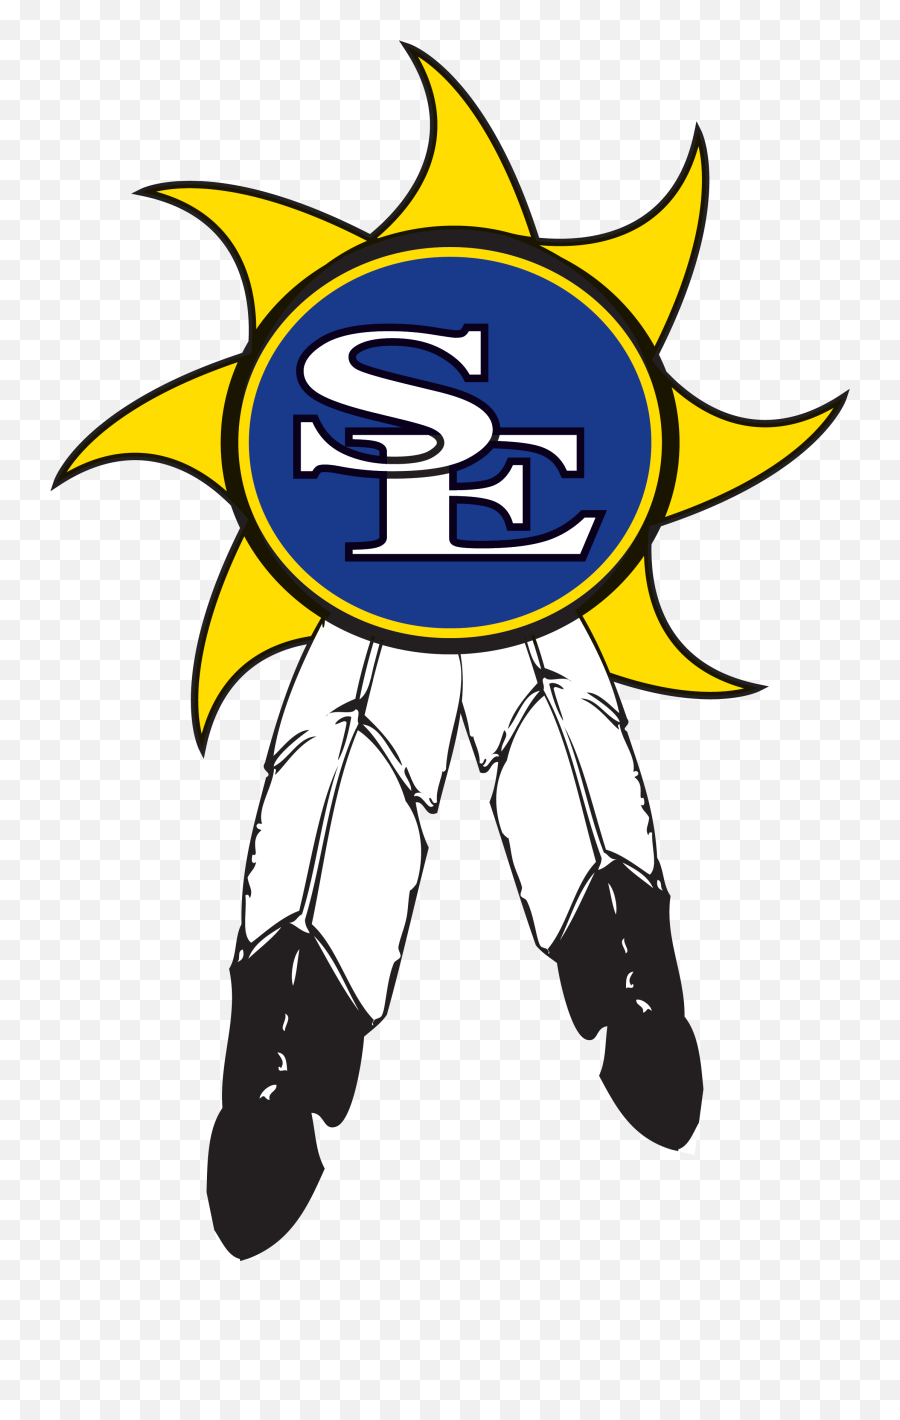 Download And Share Clipart About Southeastern Oklahoma State Emoji,Oklahoma University Logo